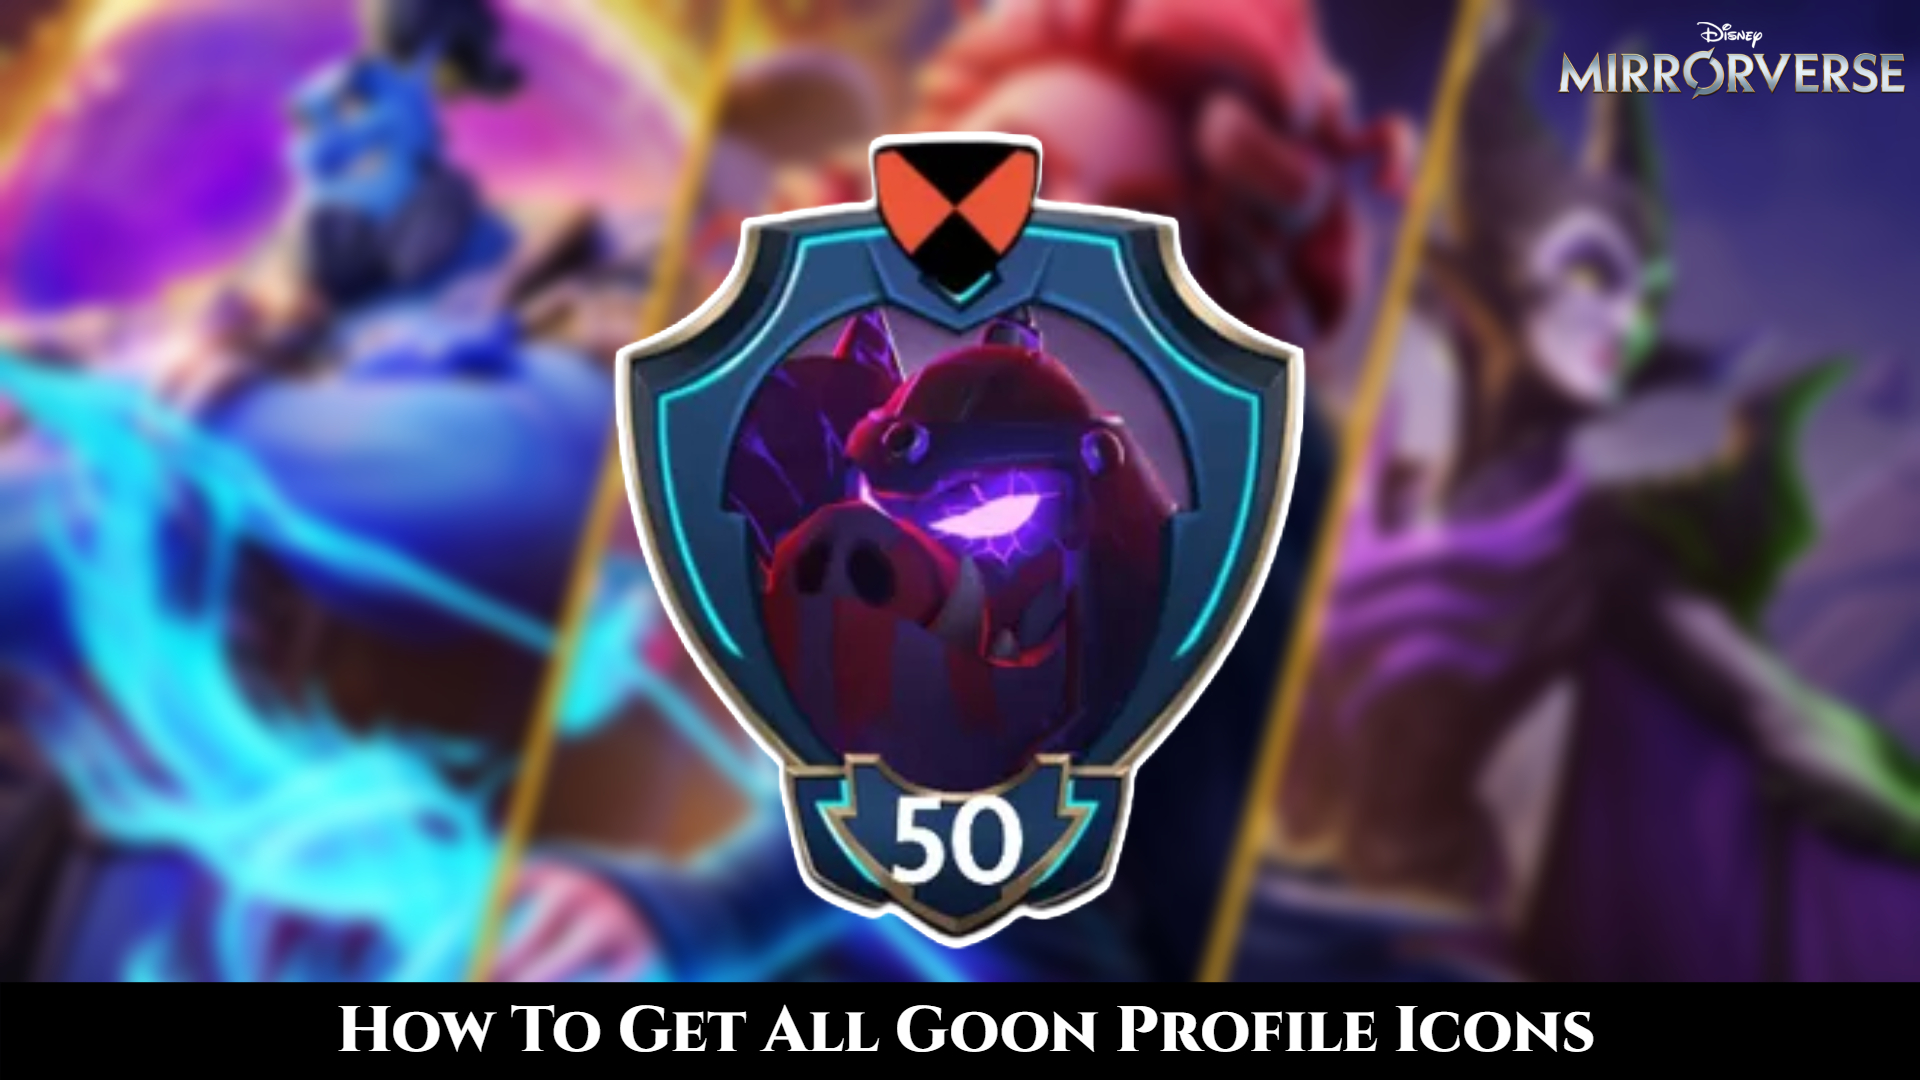 You are currently viewing Disney Mirrorverse: How To Get All Goon Profile Icons